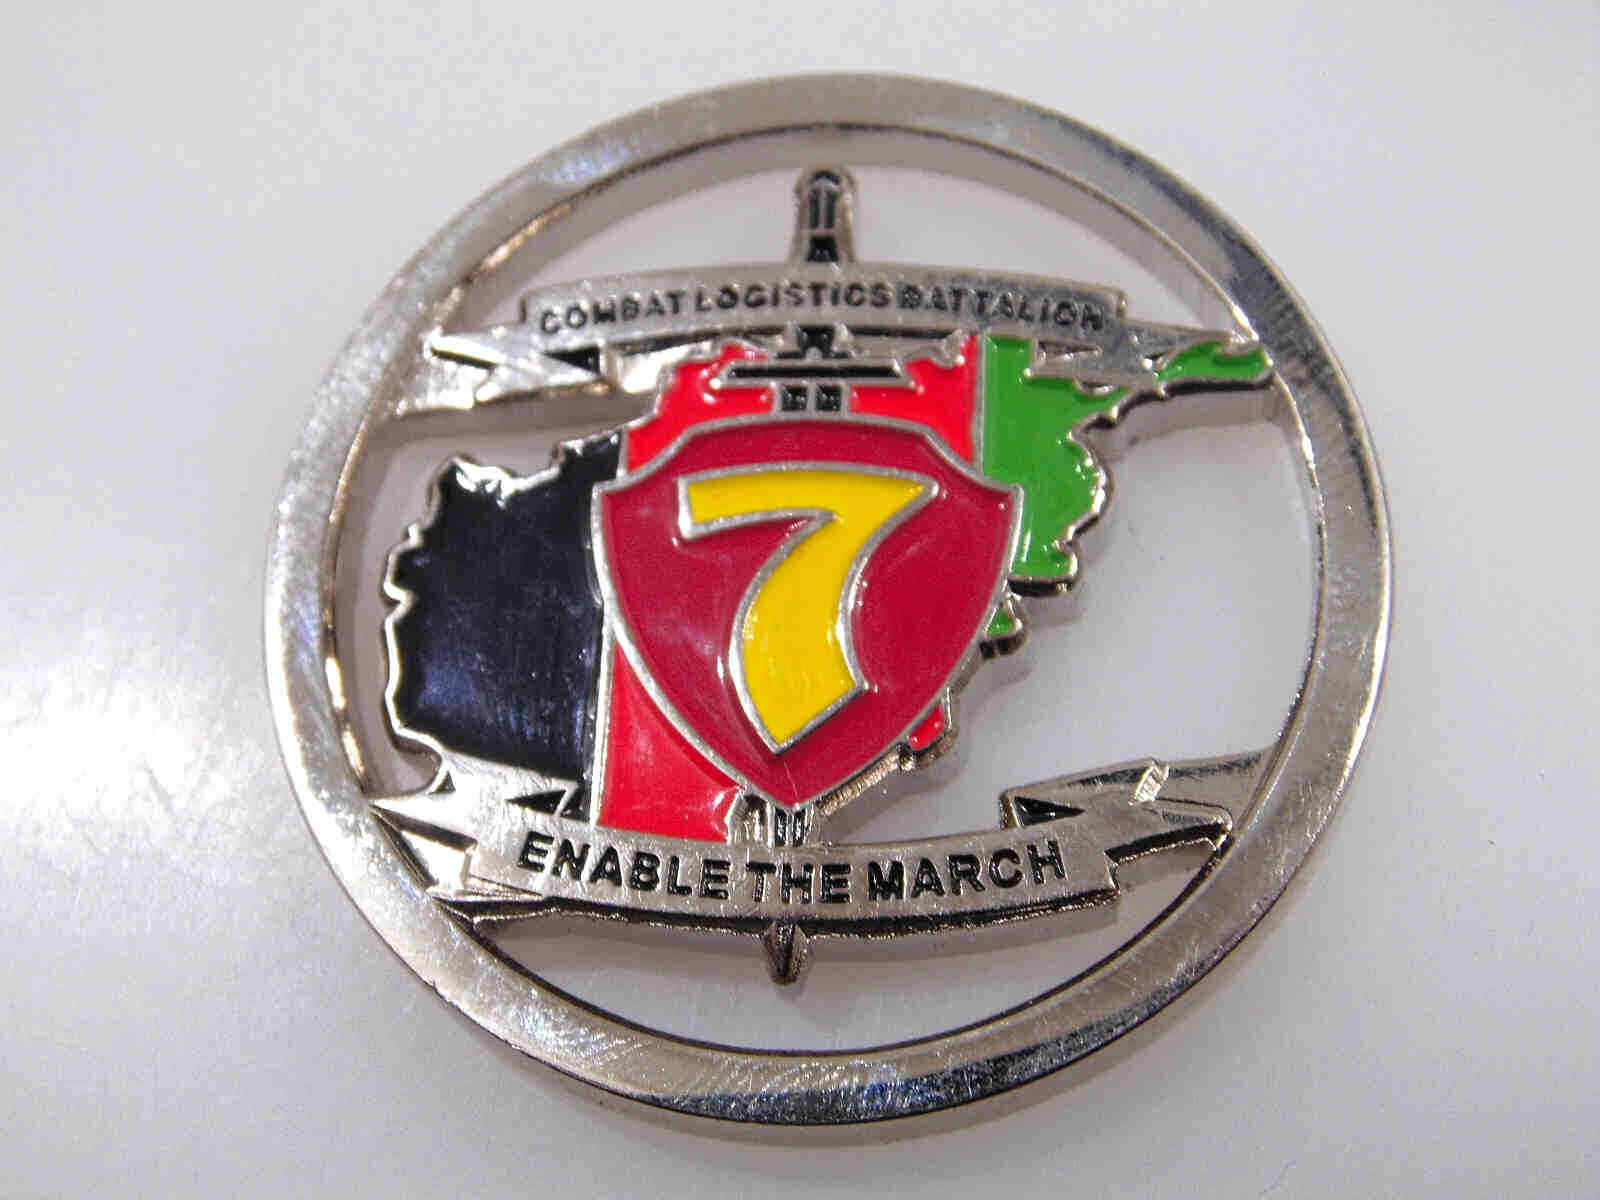 HELMAND OEF 14.1 ENABLE THE MARCH CHALLENGE COIN